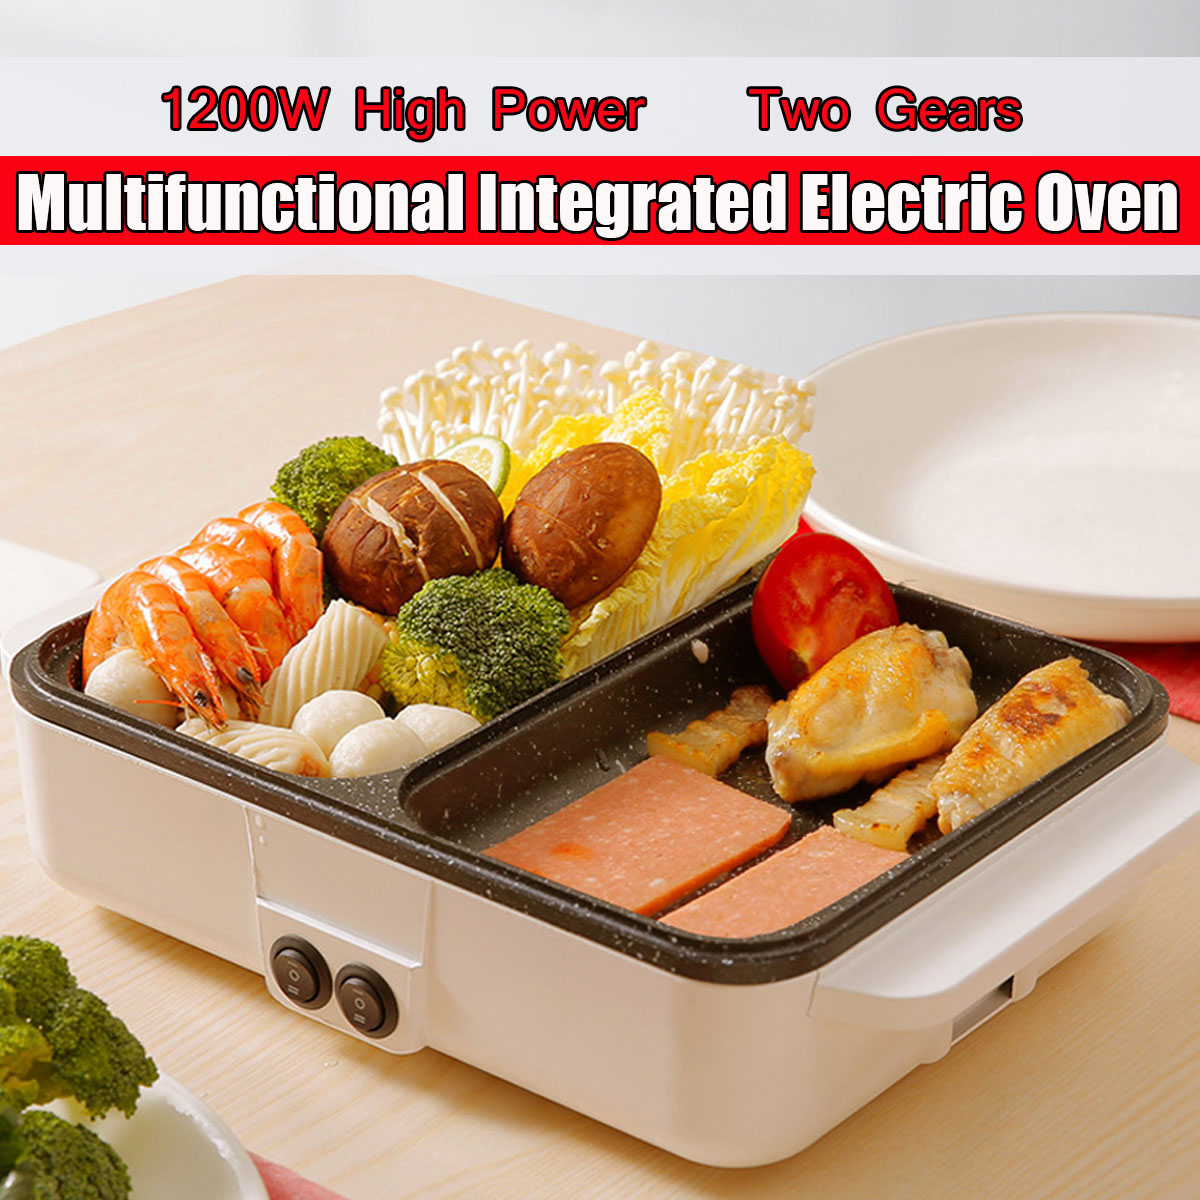 Multifunctional--Electric-Oven-220V-1200W-Roaster-Comfortable-Detachable-Cooker-1767547-1